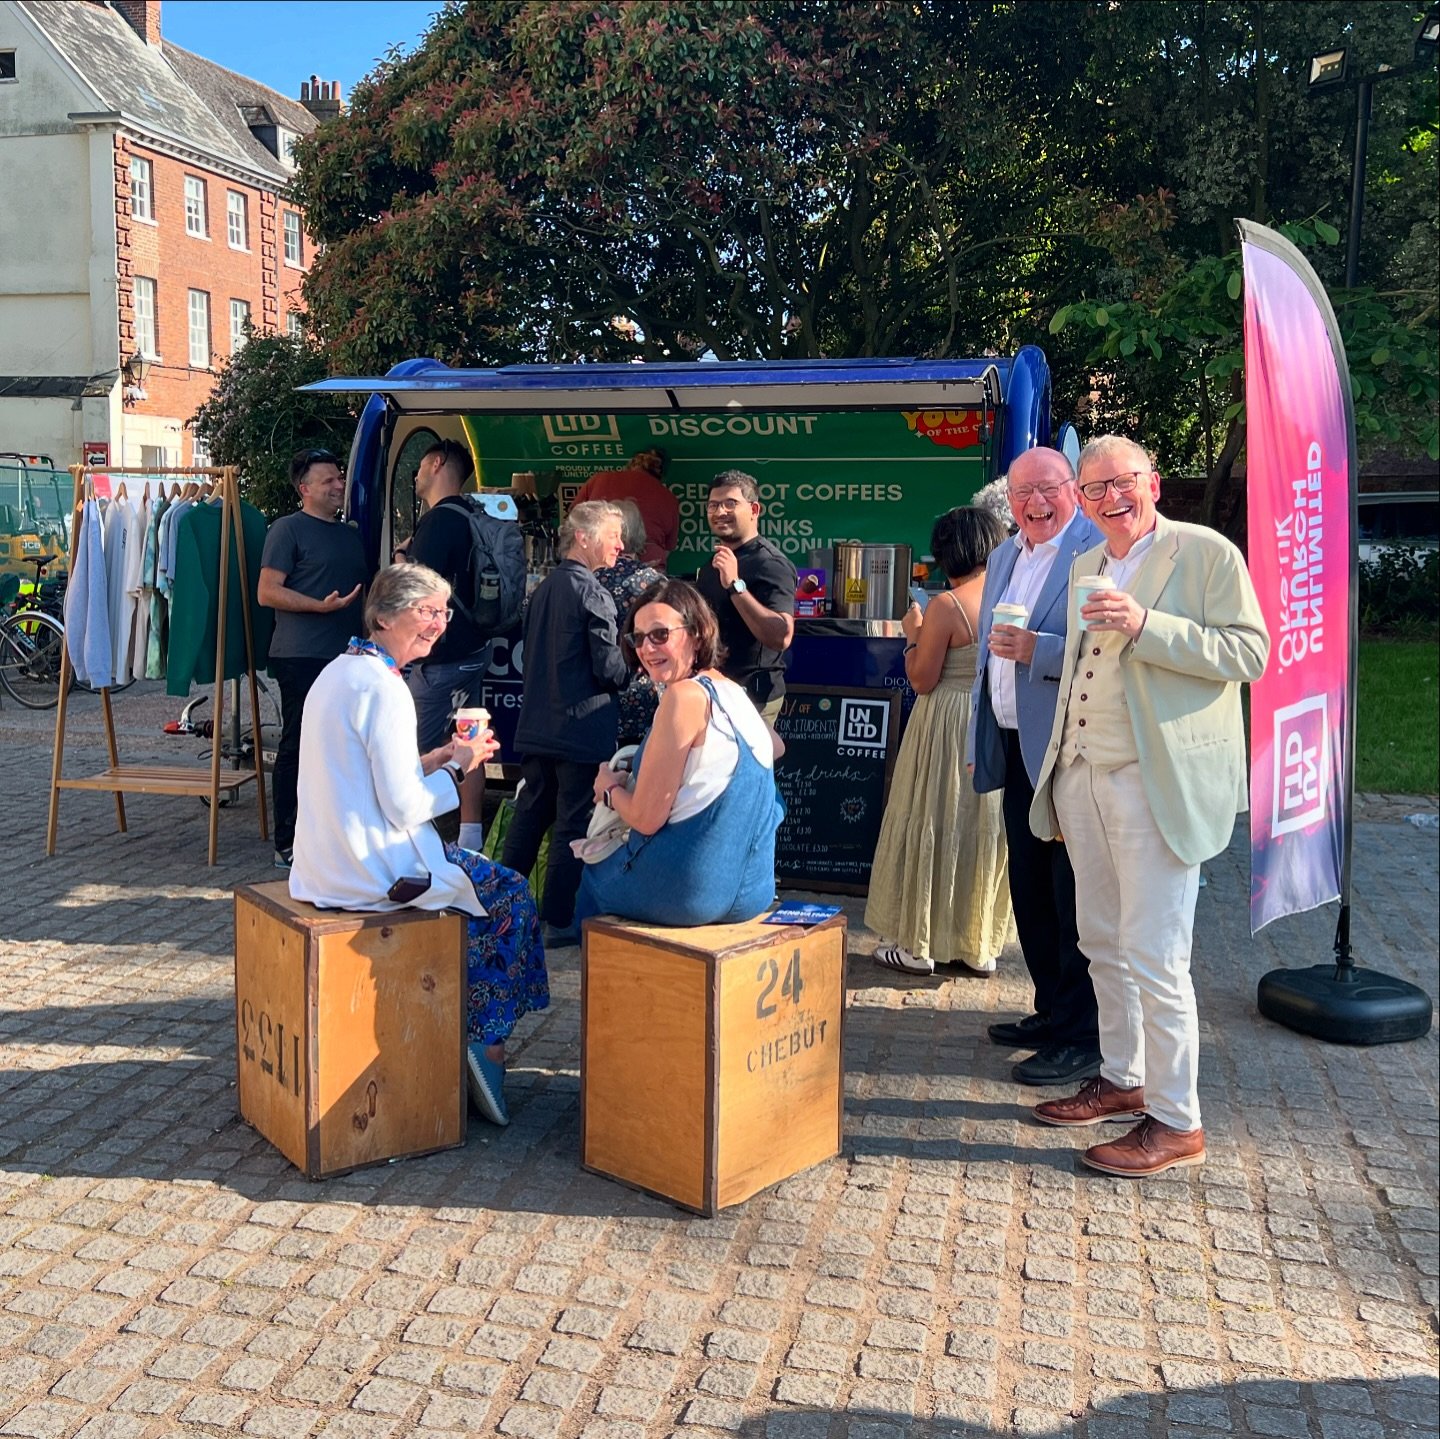 Last Sunday was sunshine and smiles! ☀️ Beautiful weather, incredible people, and the best coffee! ☕️

Such a joy to have served at the @cofedevon @thykingdomcomeprayer event and met so many wonderful people outside @exetercathedral. ✨

This week, we